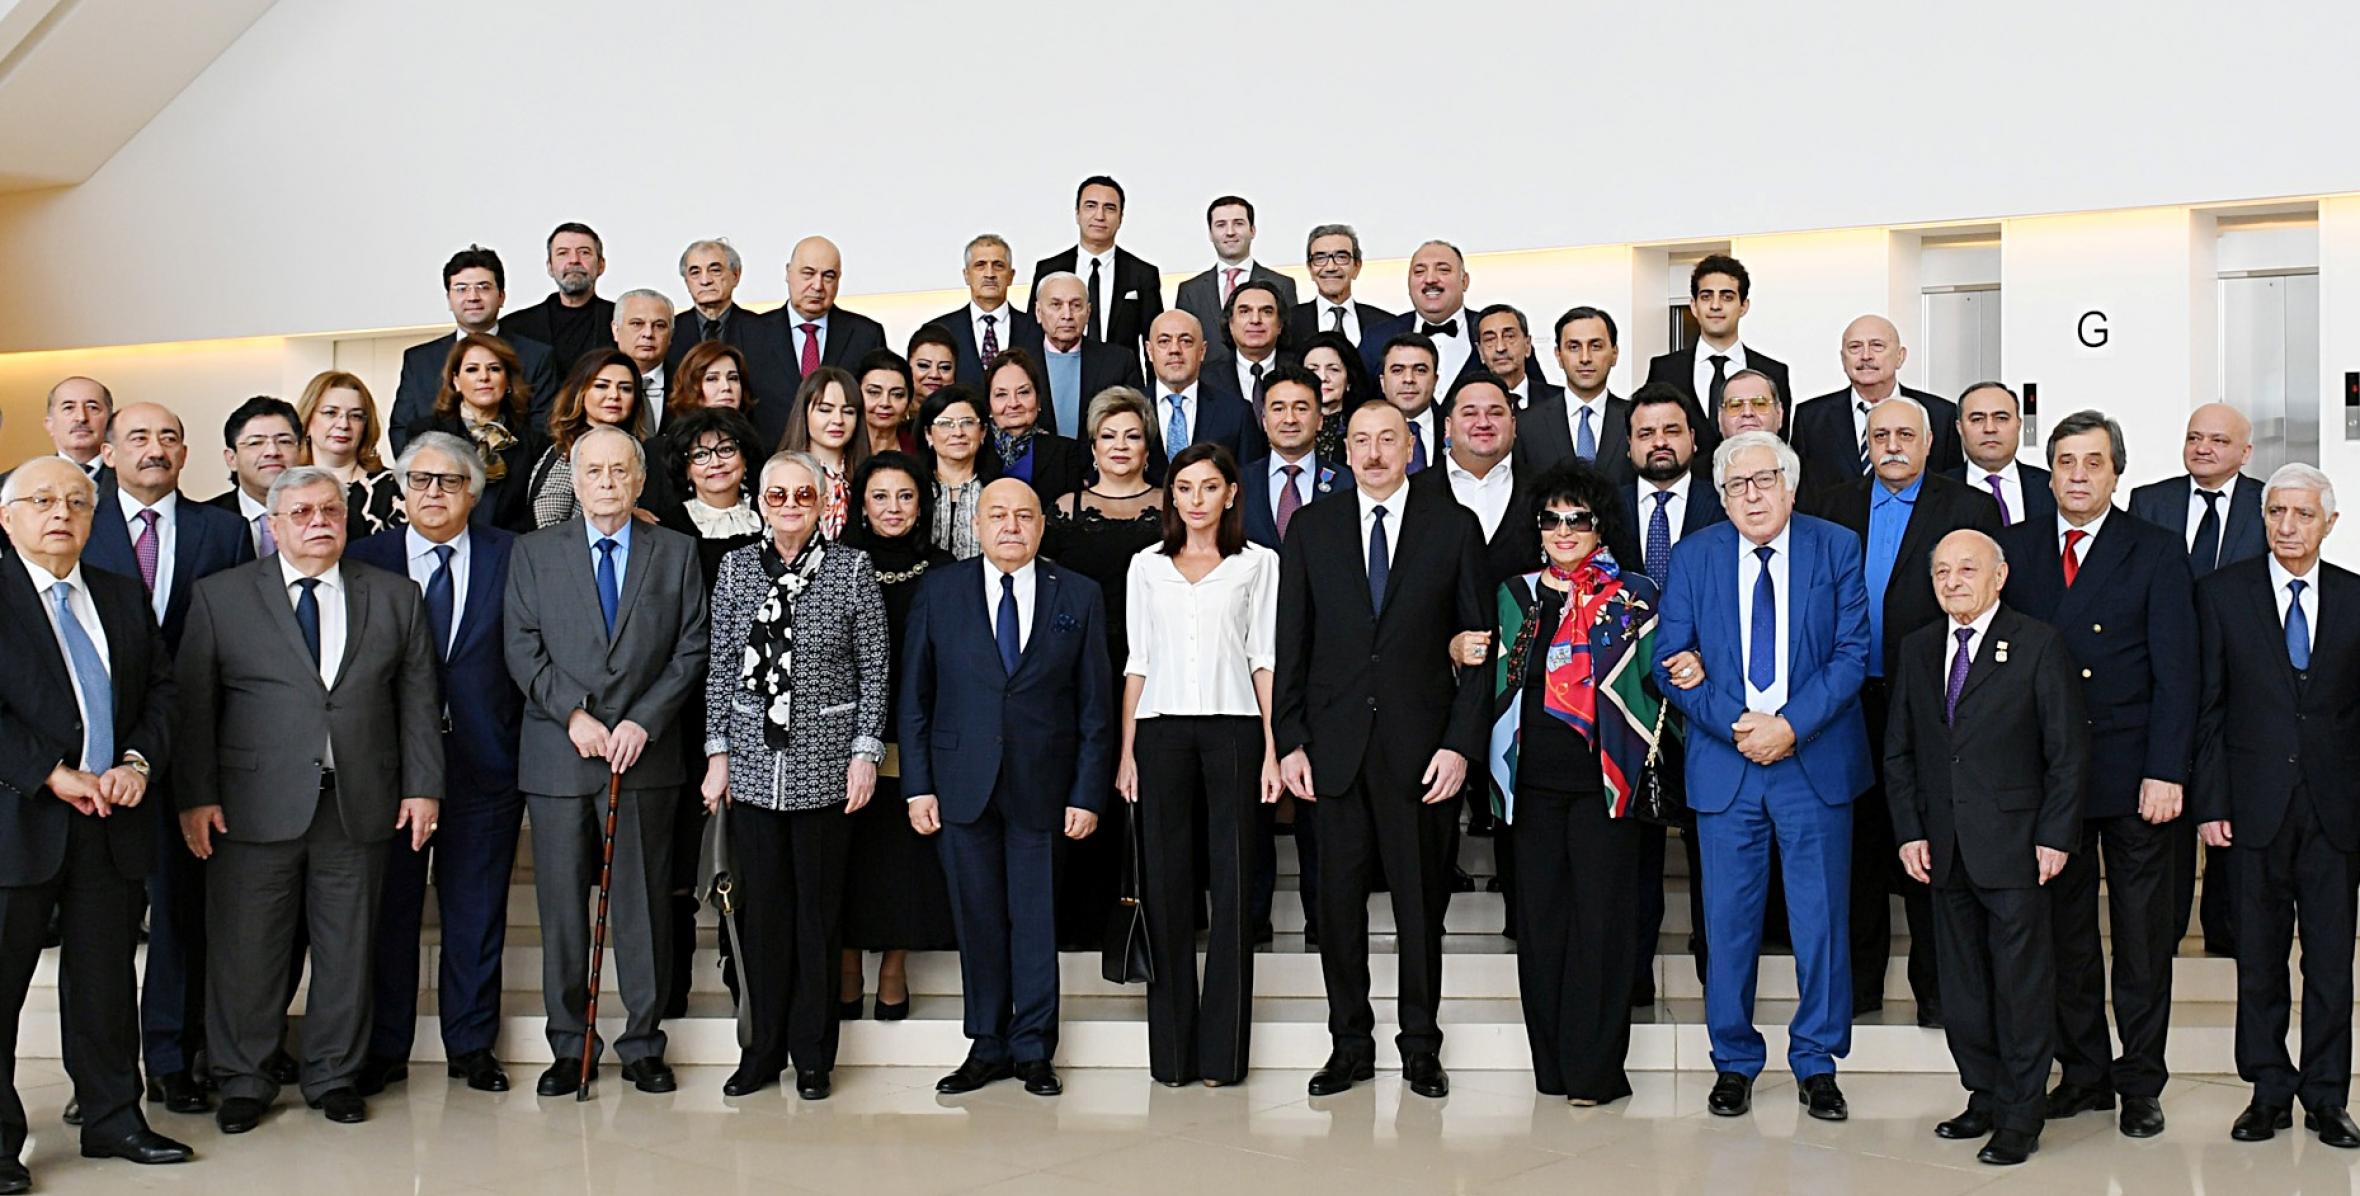 Ilham Aliyev and first lady Mehriban Aliyeva met with a group of culture and art figures